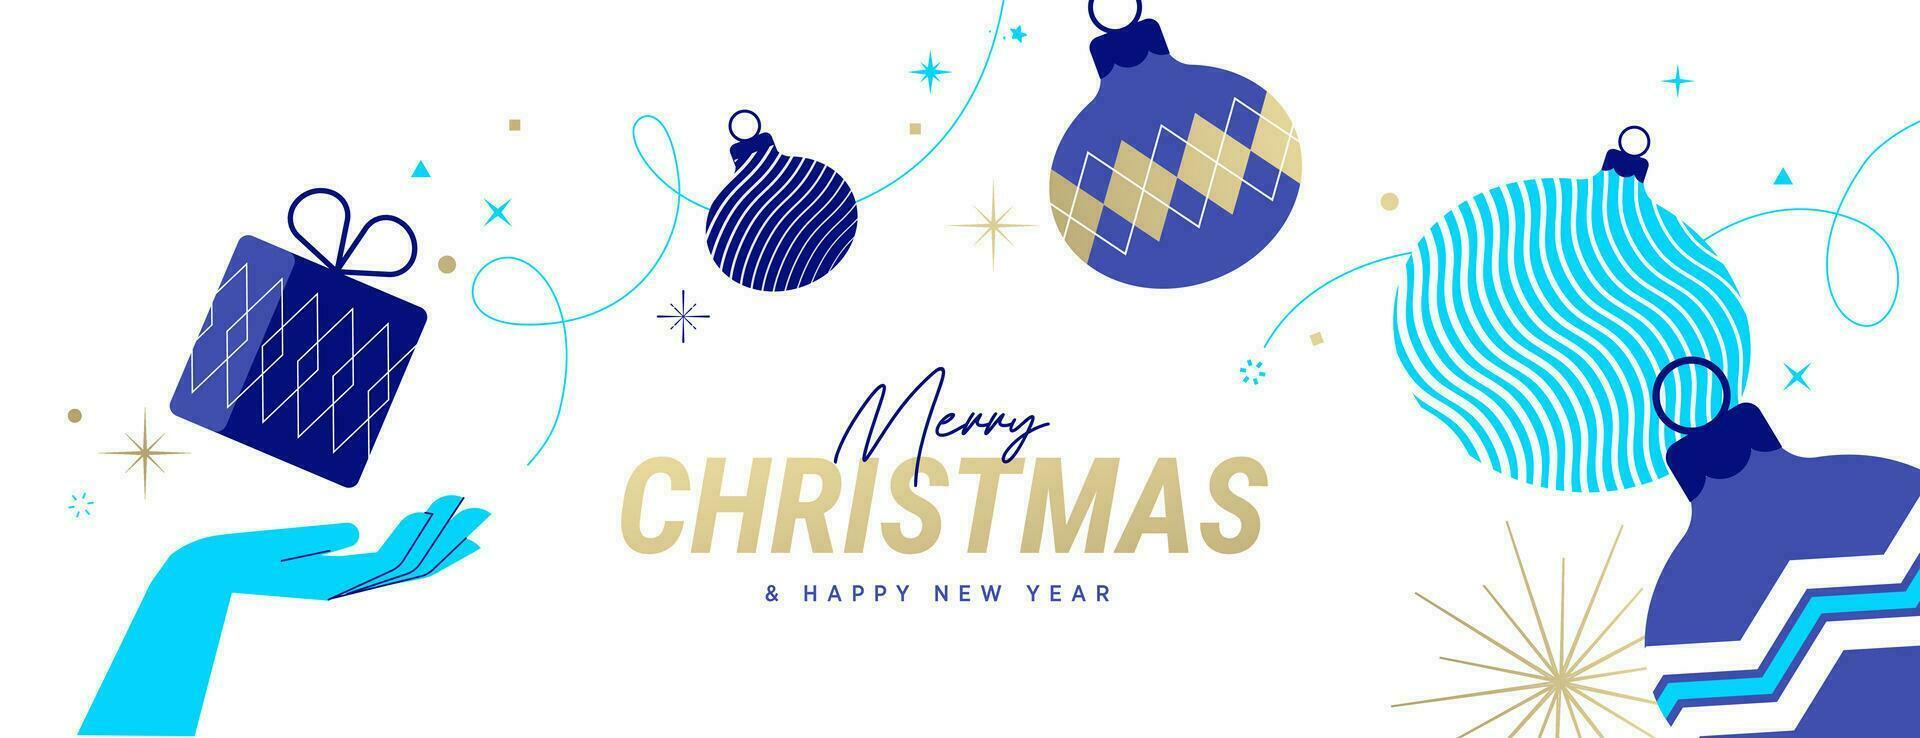 Merry Christmas and Happy New Year. Vector illustration for greeting card, party invitation card, website banner, social media banner, marketing material.